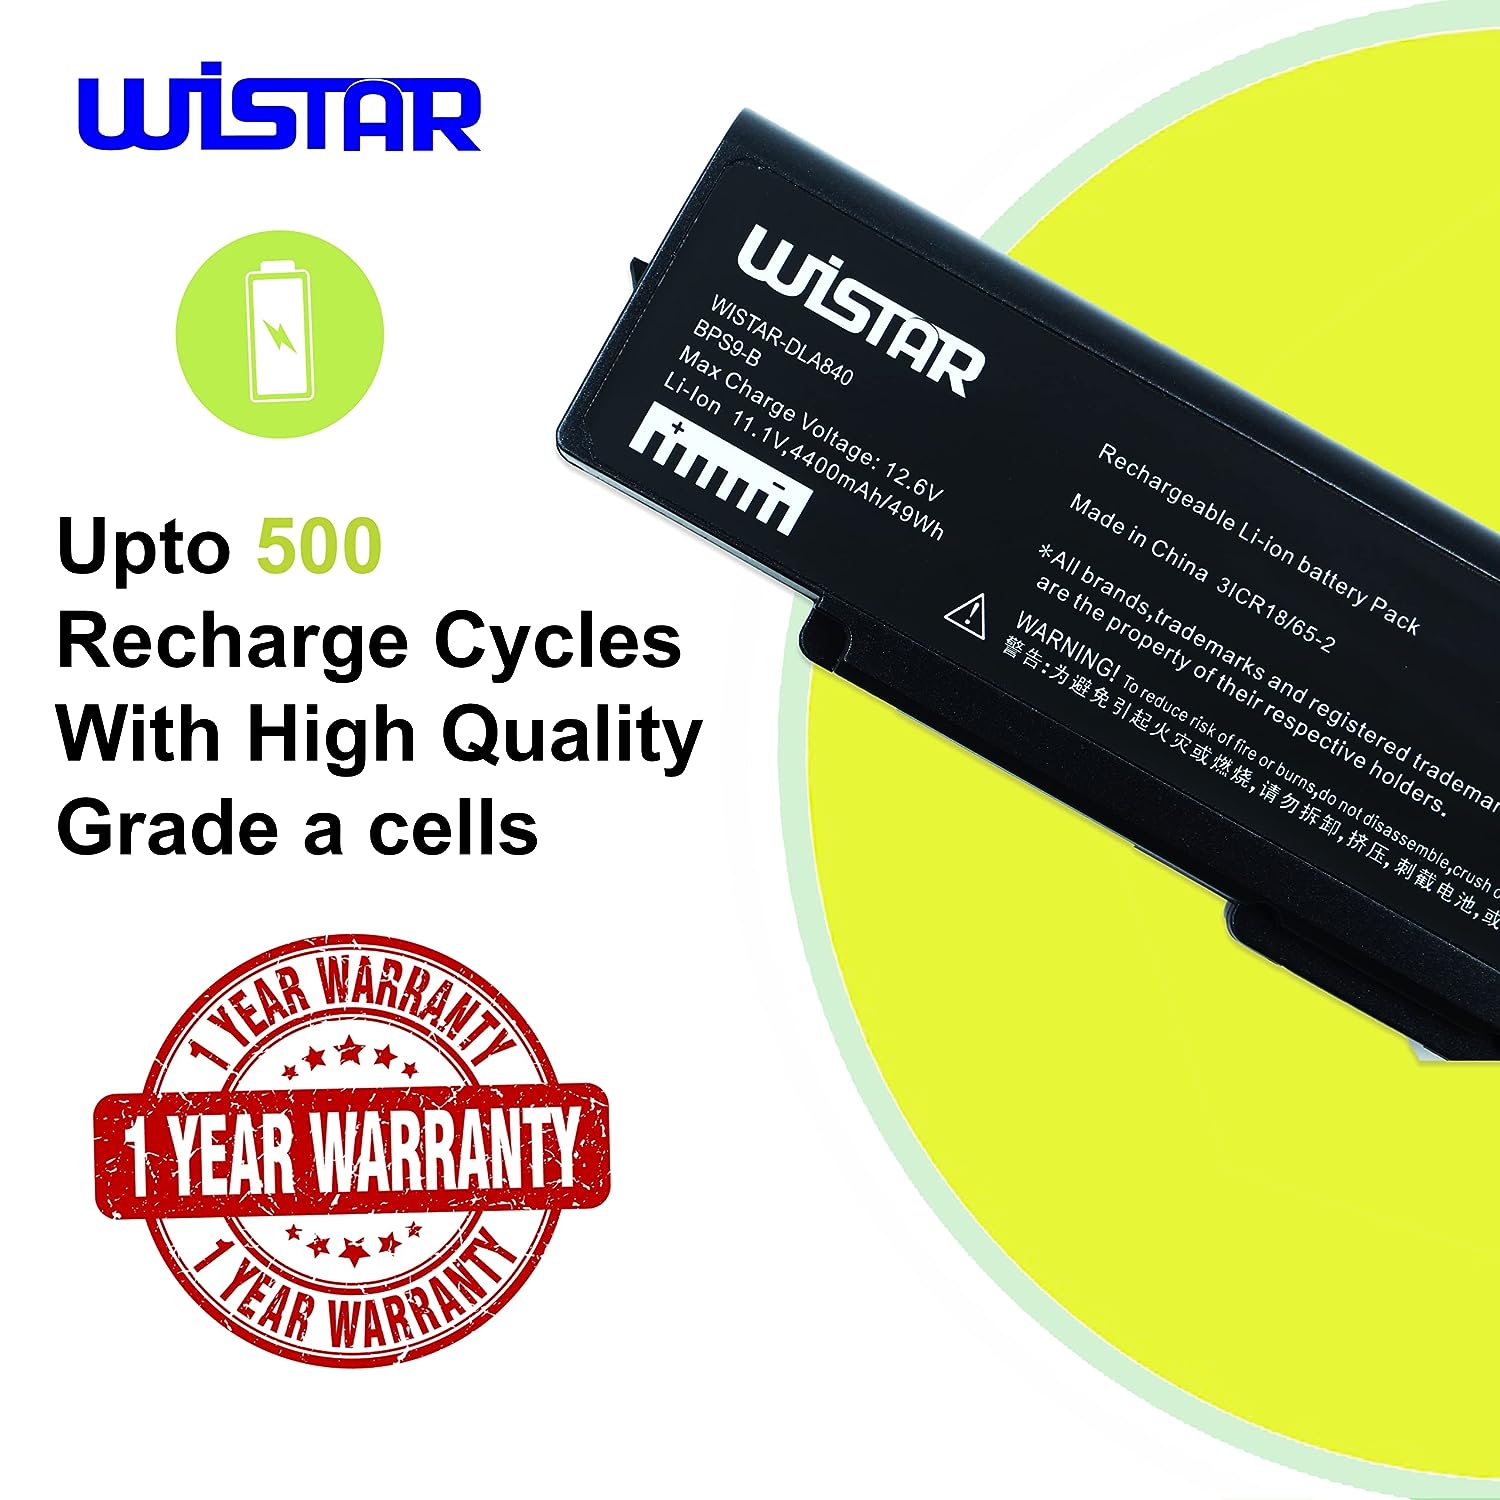 WISTAR Laptop Battery Compatible for Sony BPS9 VGP-BPL9 VGP-BPS9 VGP-BPS9/B VGP-BPS9/S VGP-BPS9A VGP-BPS9A/B